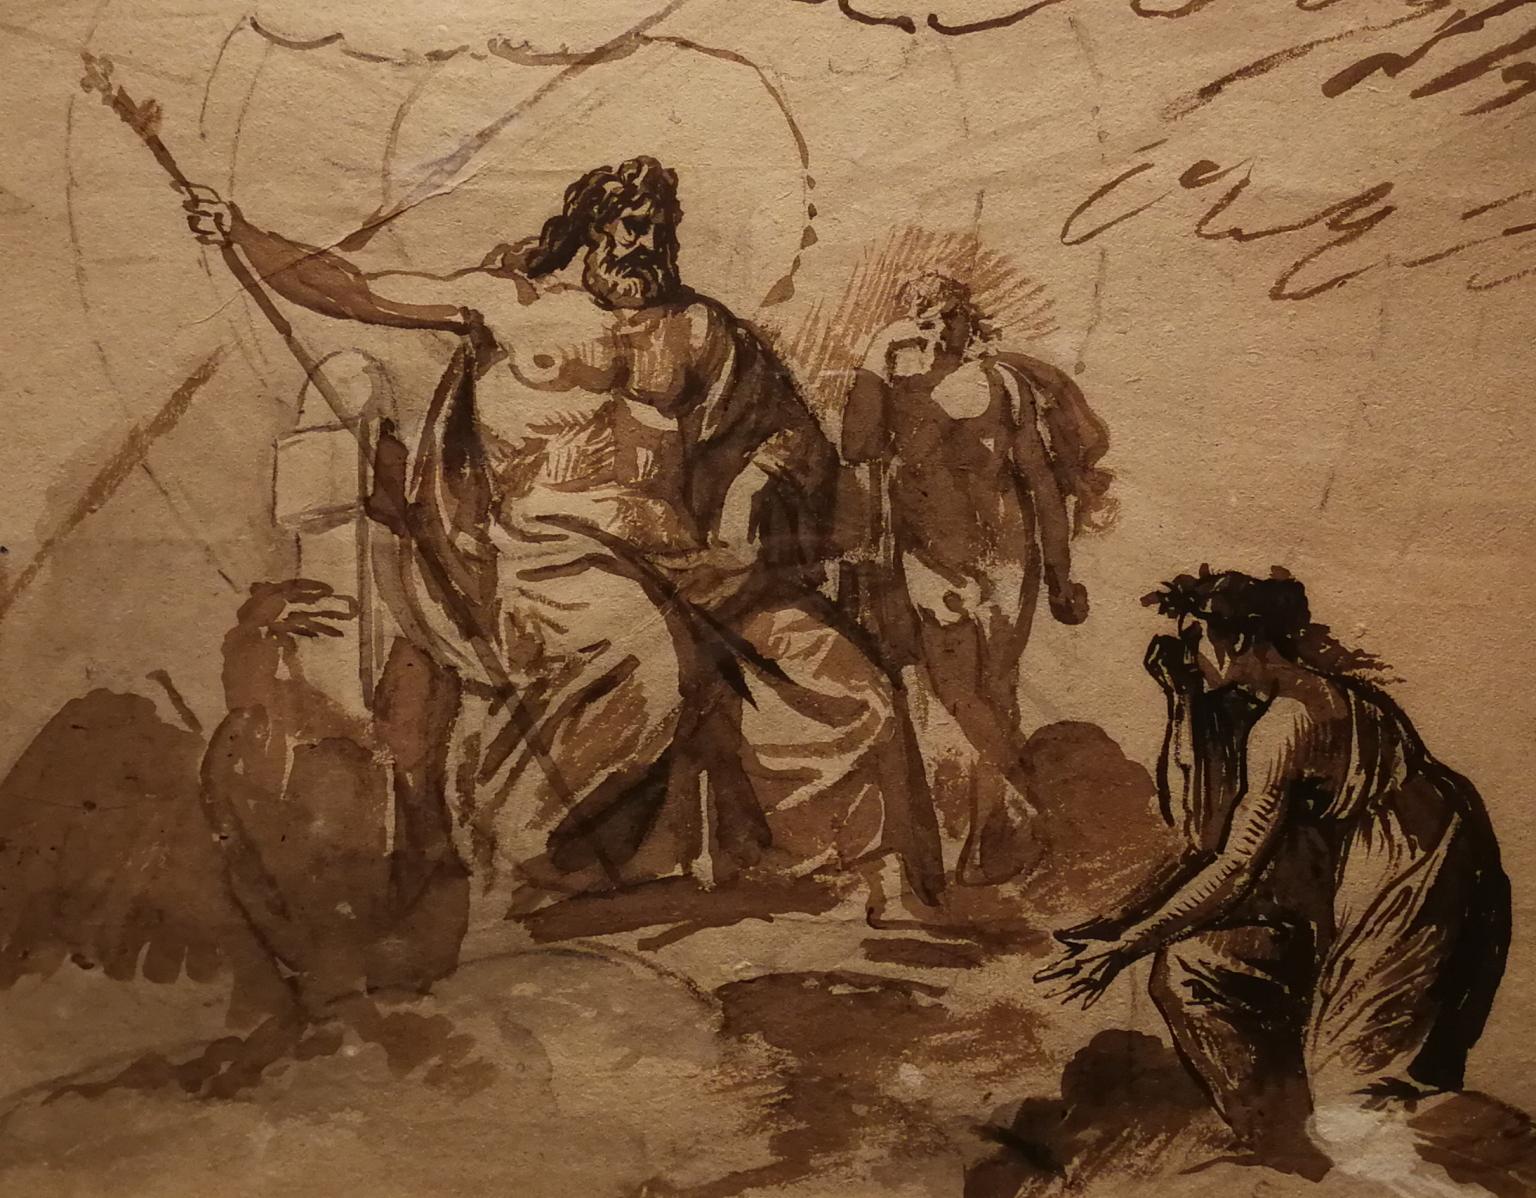 Drawing in ink, charcoal, watercolors and white lead on paper related to the series of studies for the decoration of the “Hercules Room” in Palazzo Pitti in Florence. 
It’s done by Pietro Benvenuti, Tuscan Artist hired for this commission at first